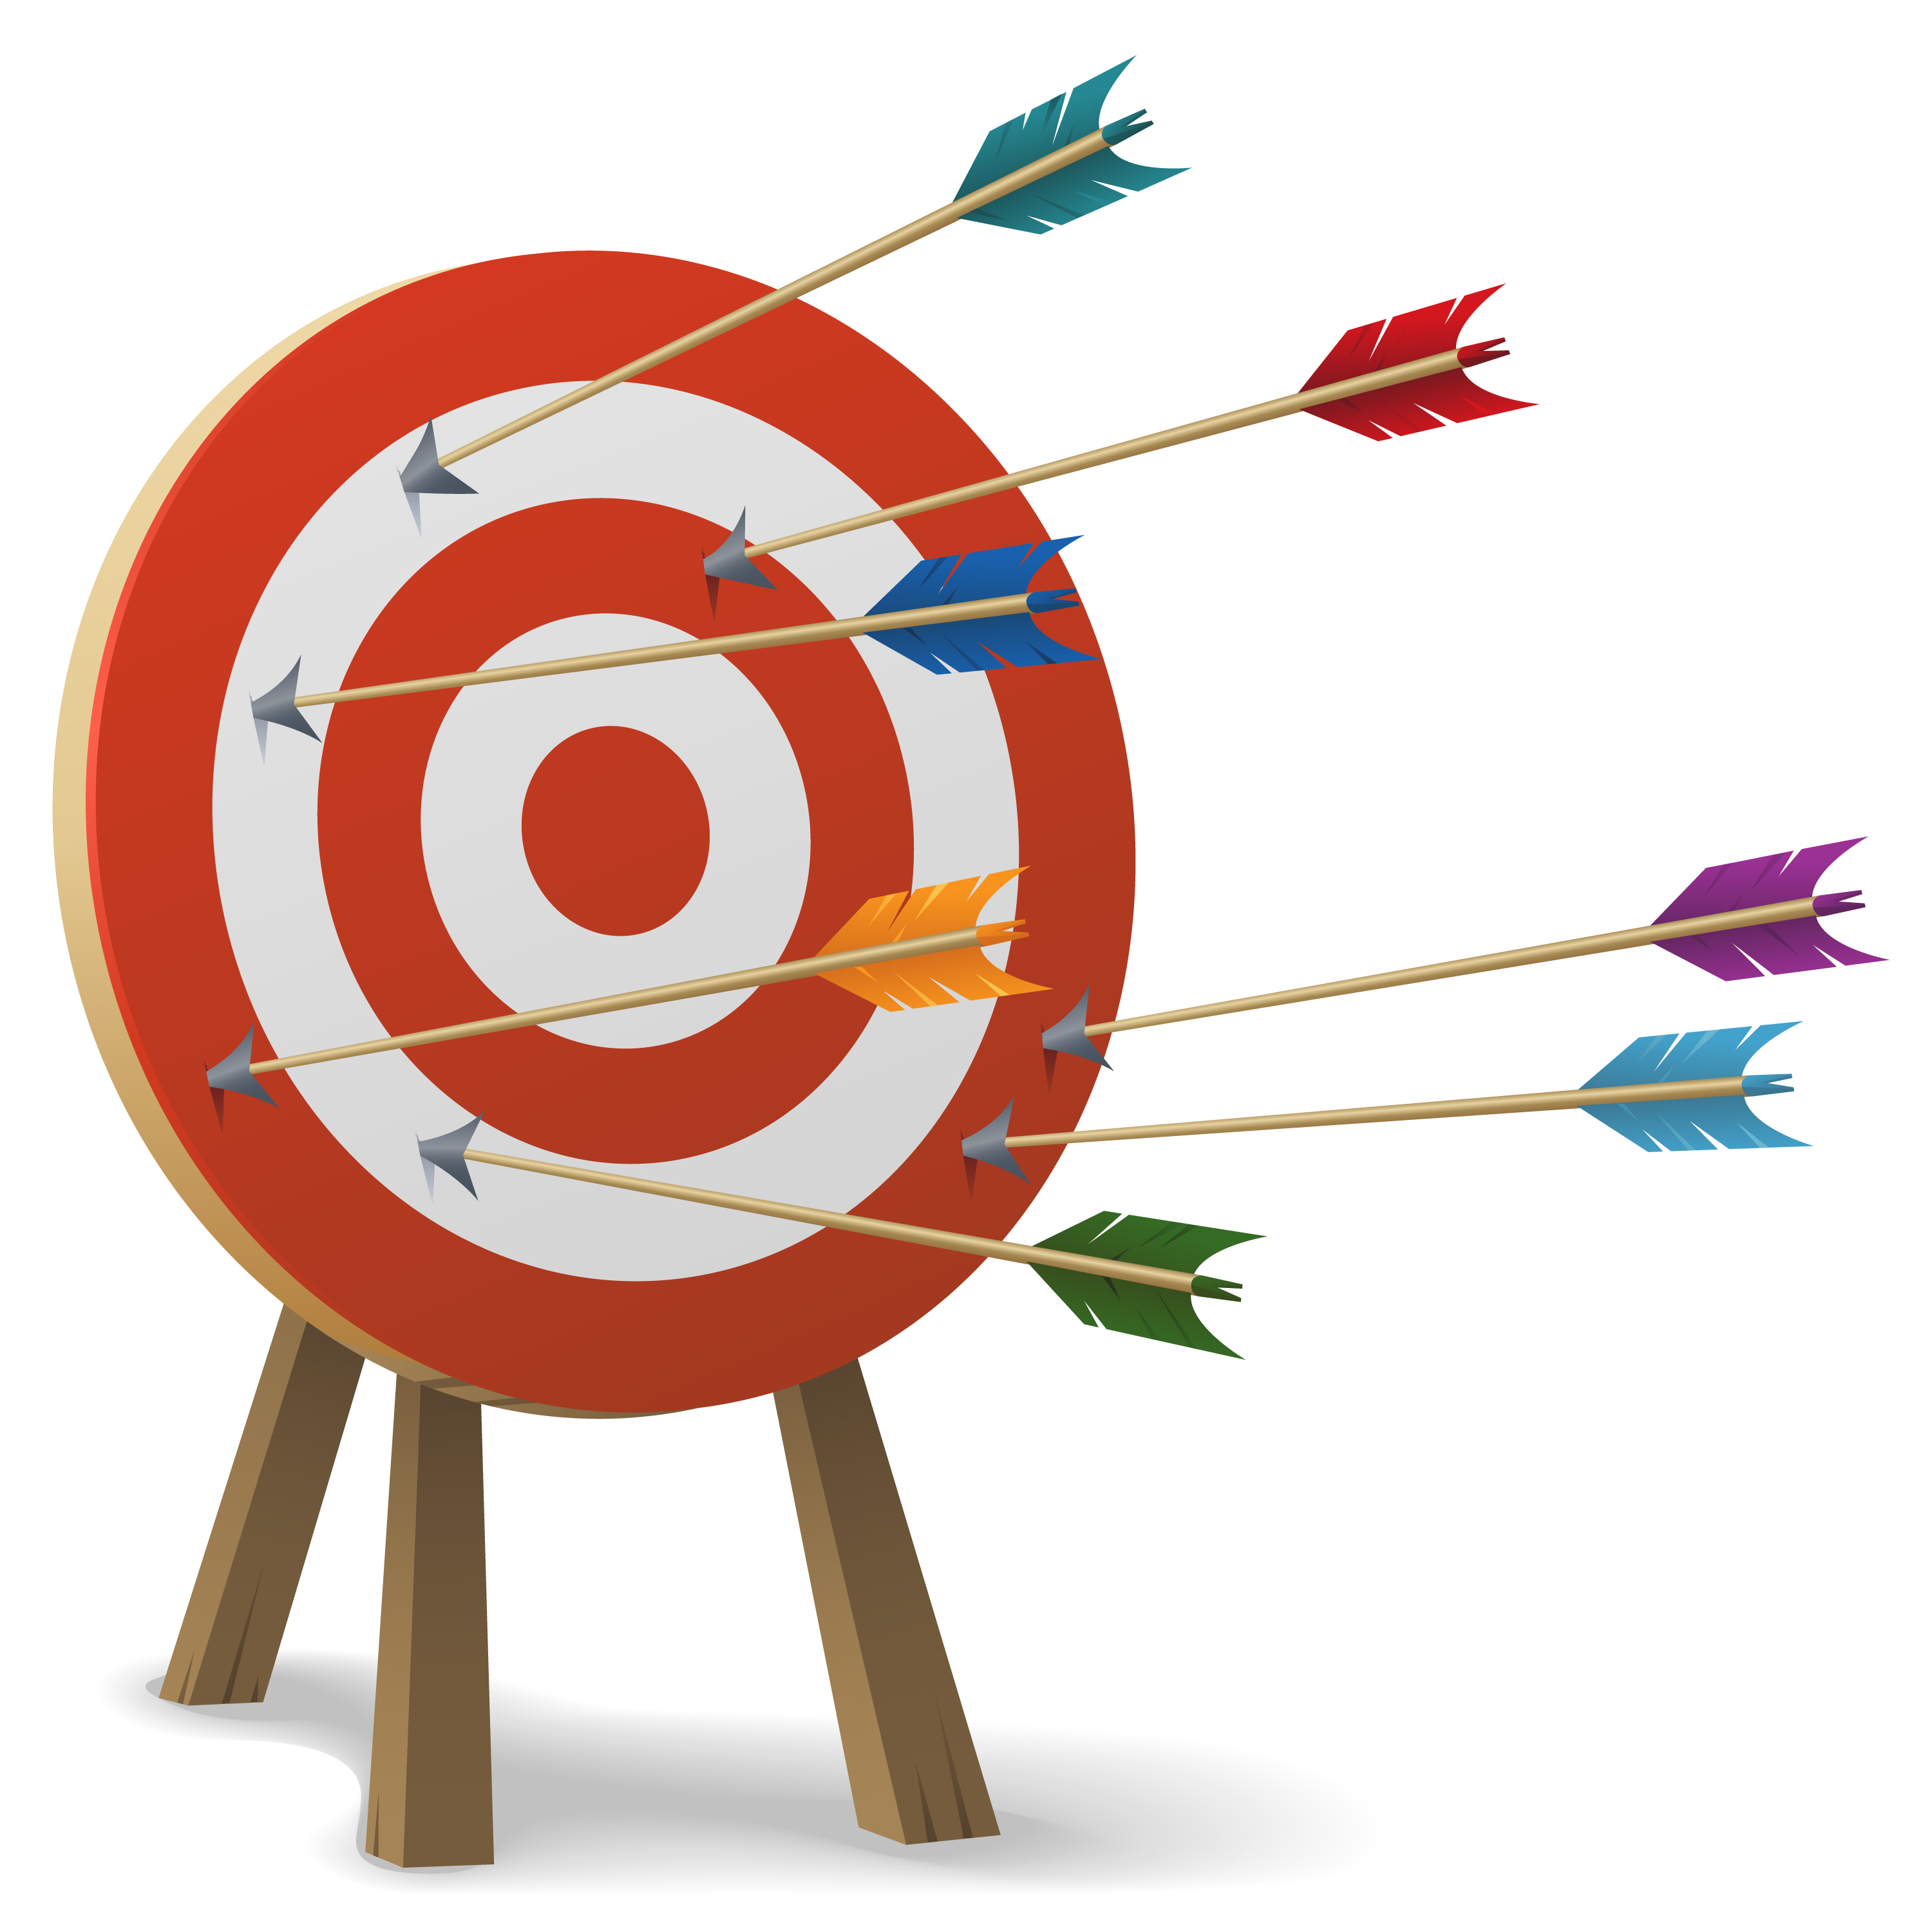 moving target clipart - photo #37